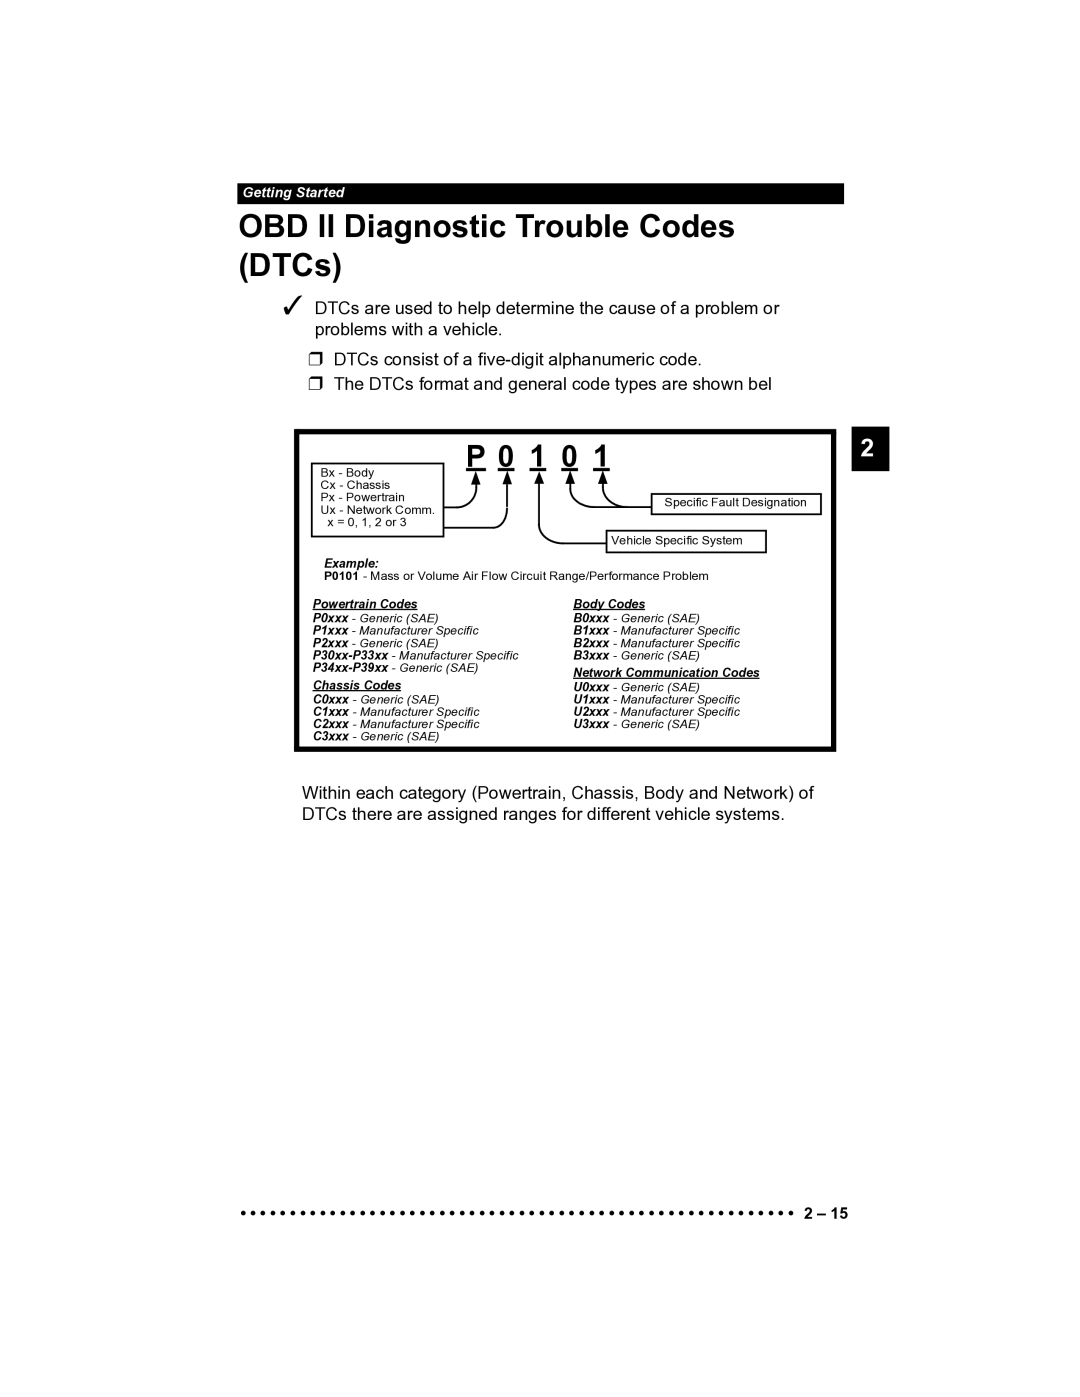 Actron CP9185 manual OBD II Diagnostic Trouble Codes DTCs, 1 0 